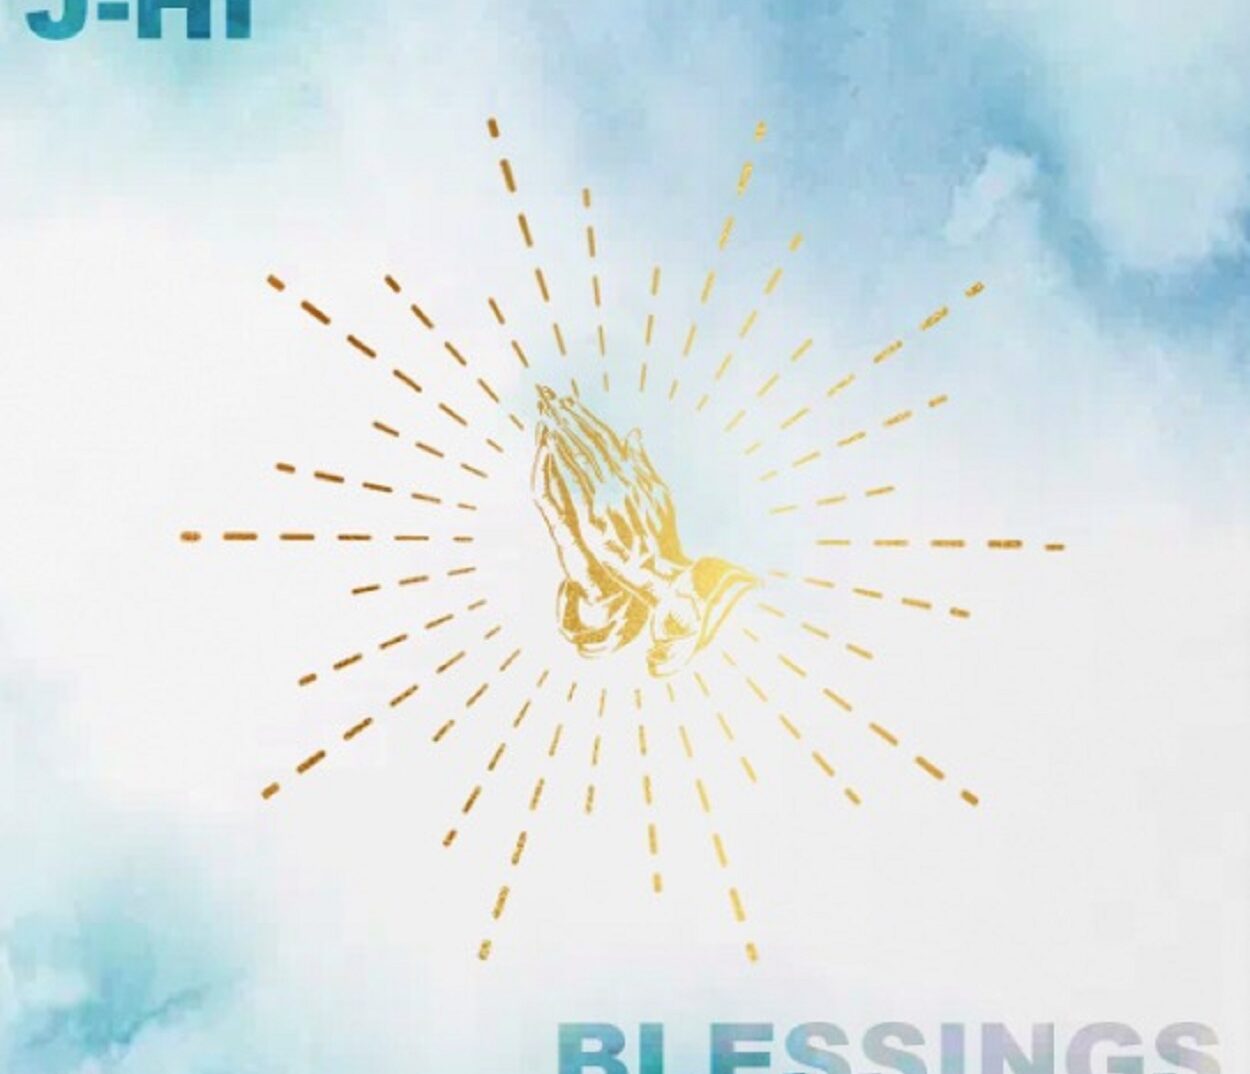 Blessings by J-Hi out now